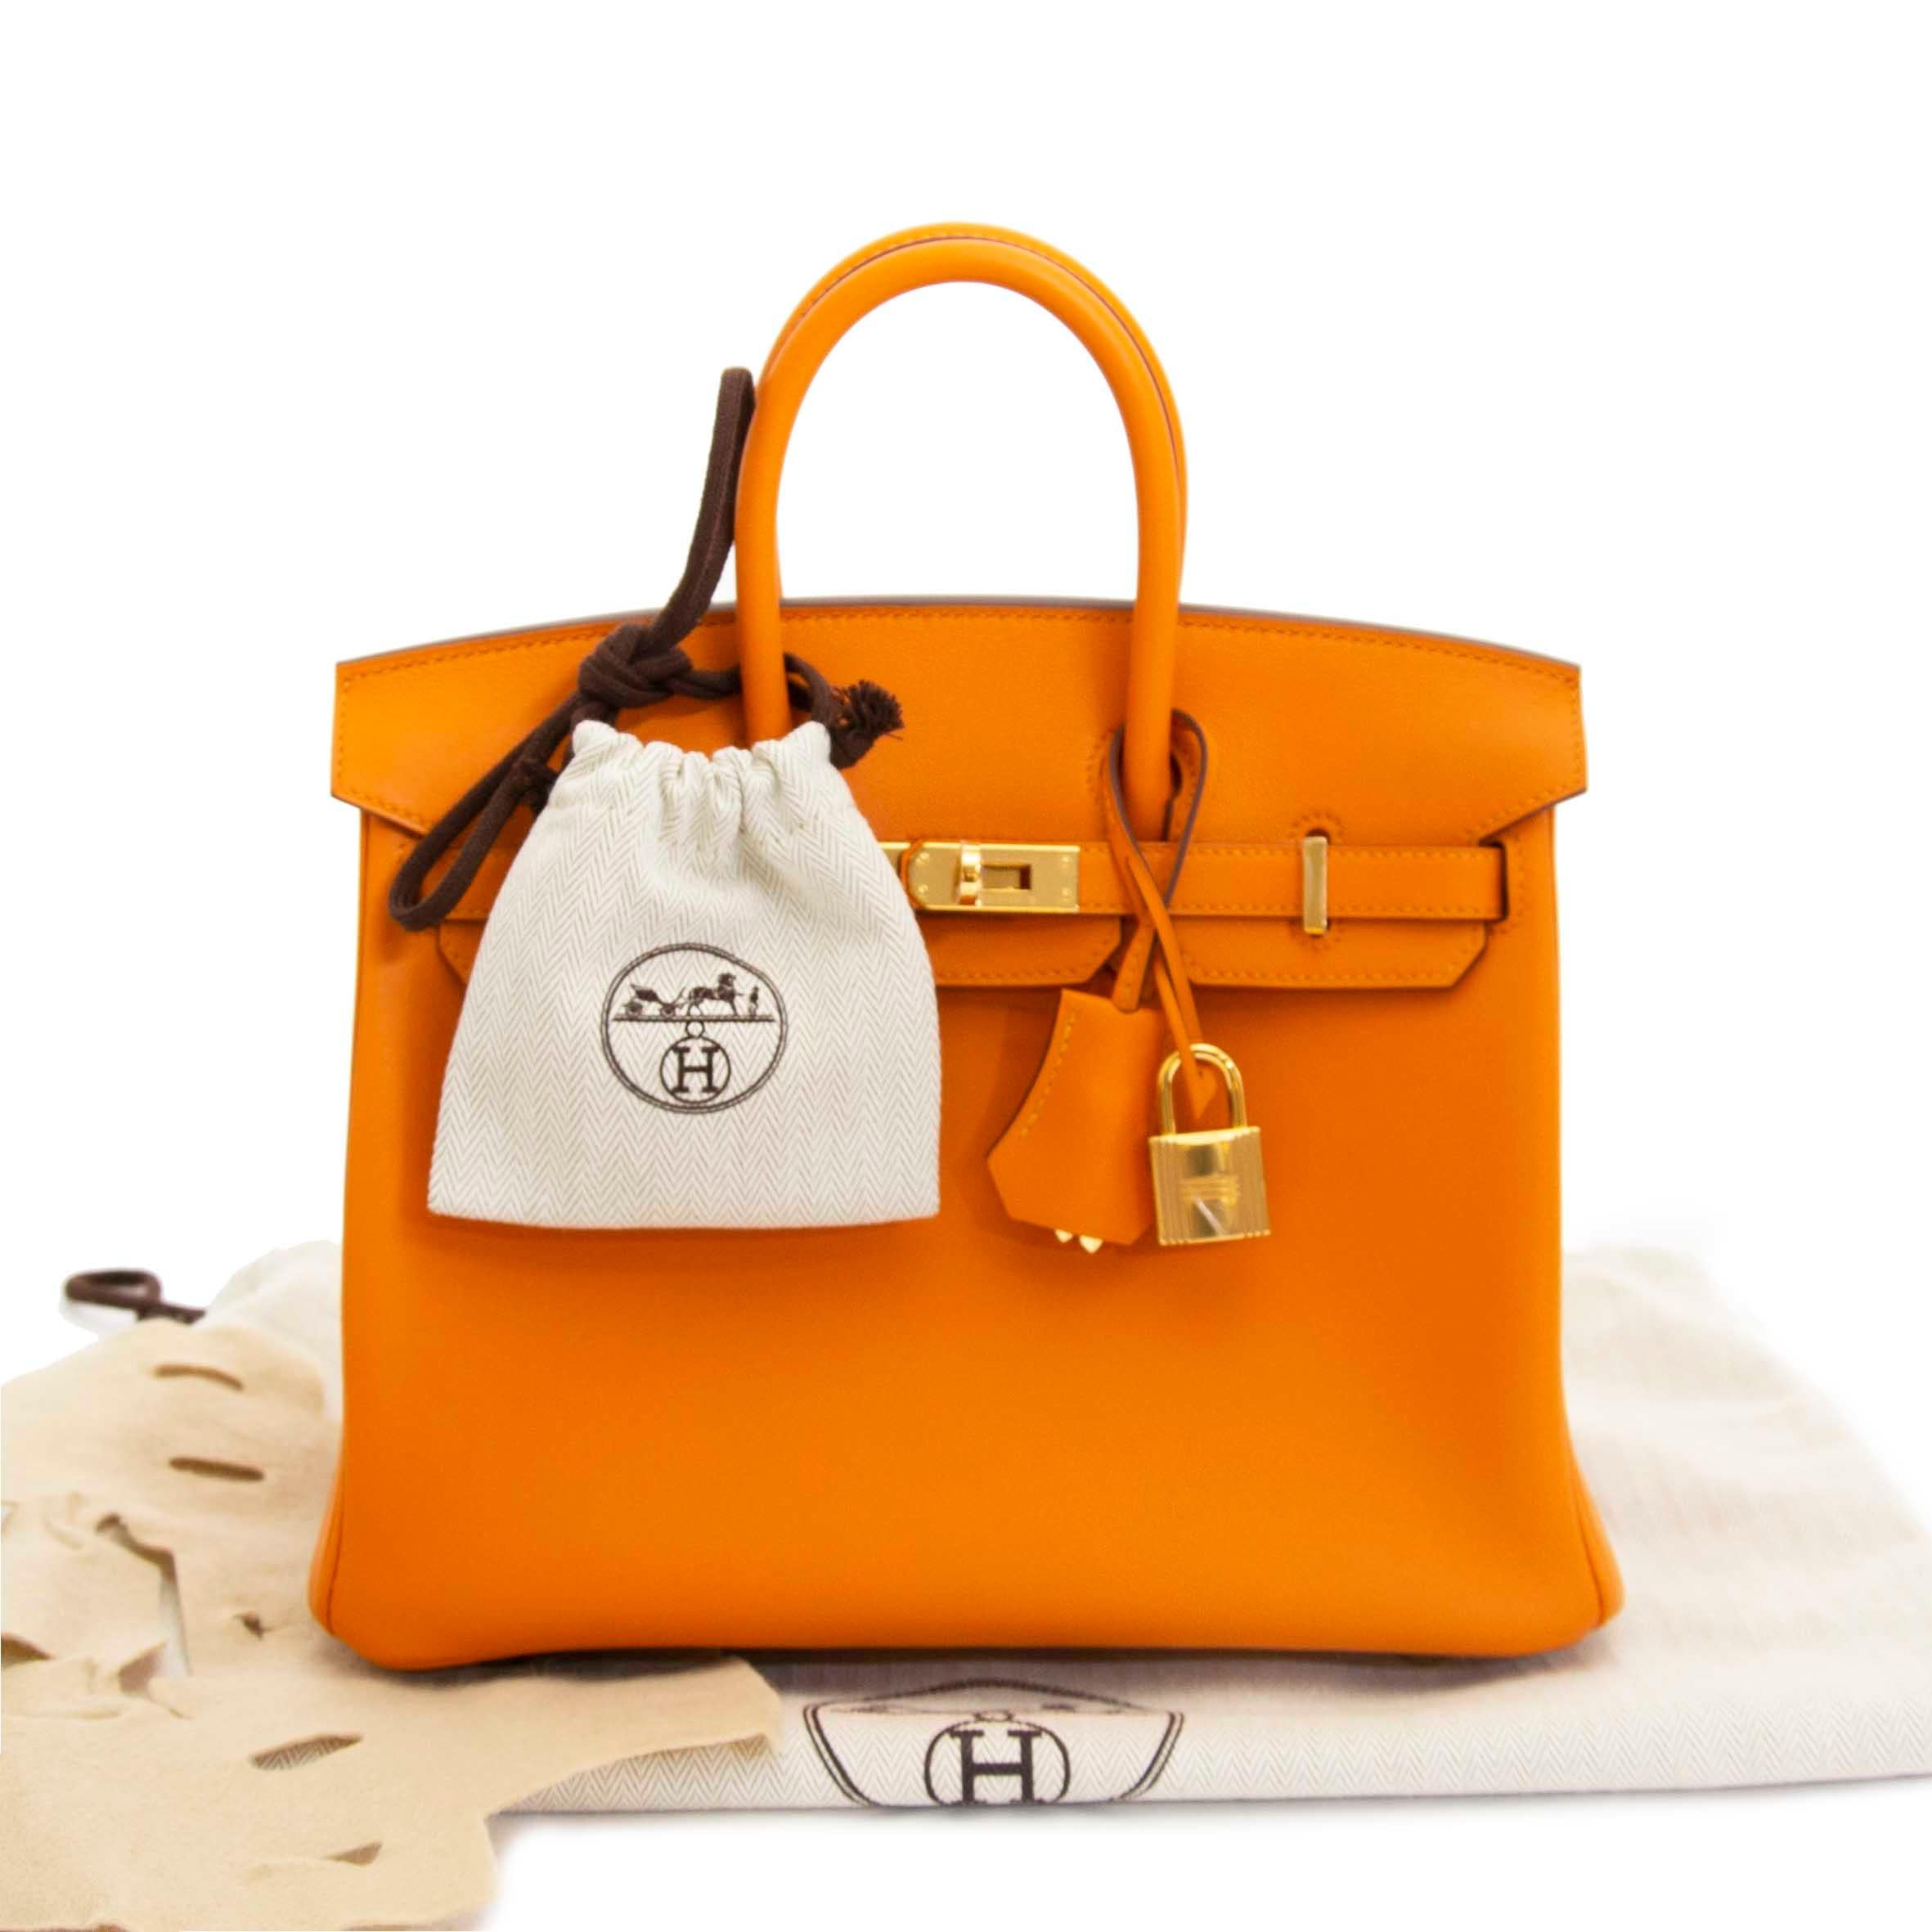 Hermès Birkin 25 Apricot Swift GHW

This vibrantly colored Hermès Birkin in the highly coveted 25 size comes in a gorgeous apricot orange hue.
The wonderfulness of the leather is complemented with gold toned hardware.

Swift leather is soft to the